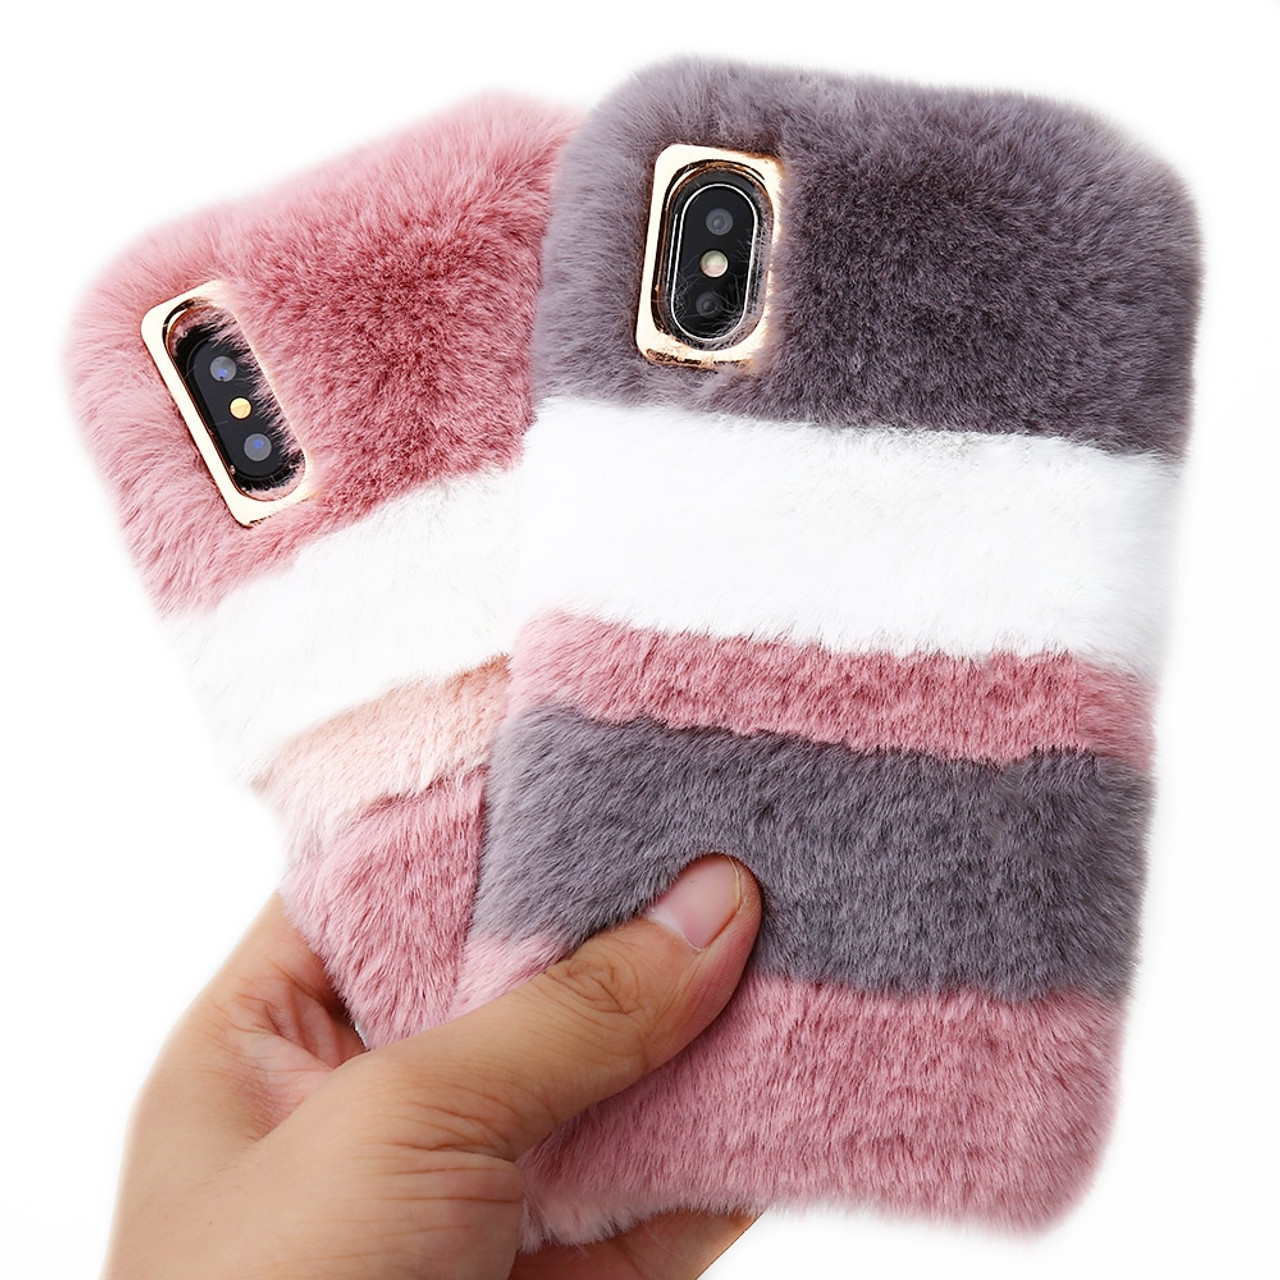 Girl Cute Rabbit Fur Plush Case For Iphone 10 X 6s 7 8 Plus Touch Soft Winter Warm Cover Case For Iphone Xr Xs Max Phone Cases Onshopdeals Com